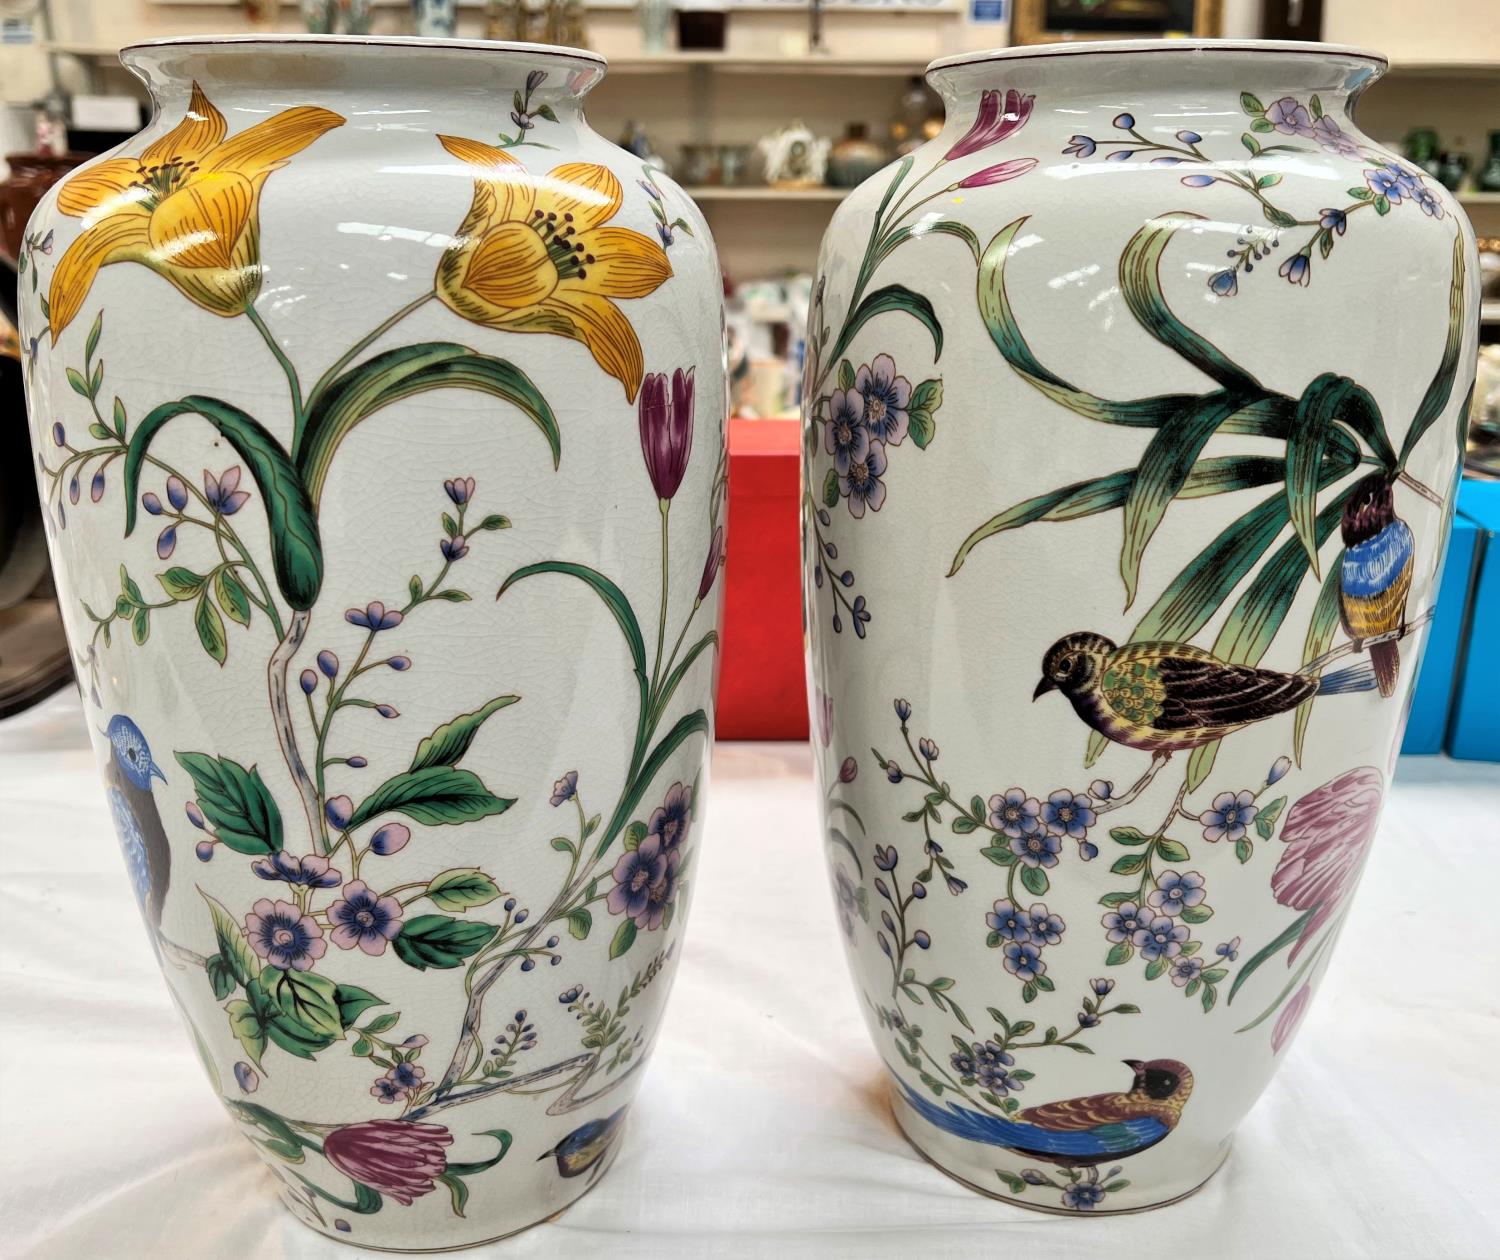 A modern Chinese pair of crackle glaze vases decorated with flowers and birds, height 36cm